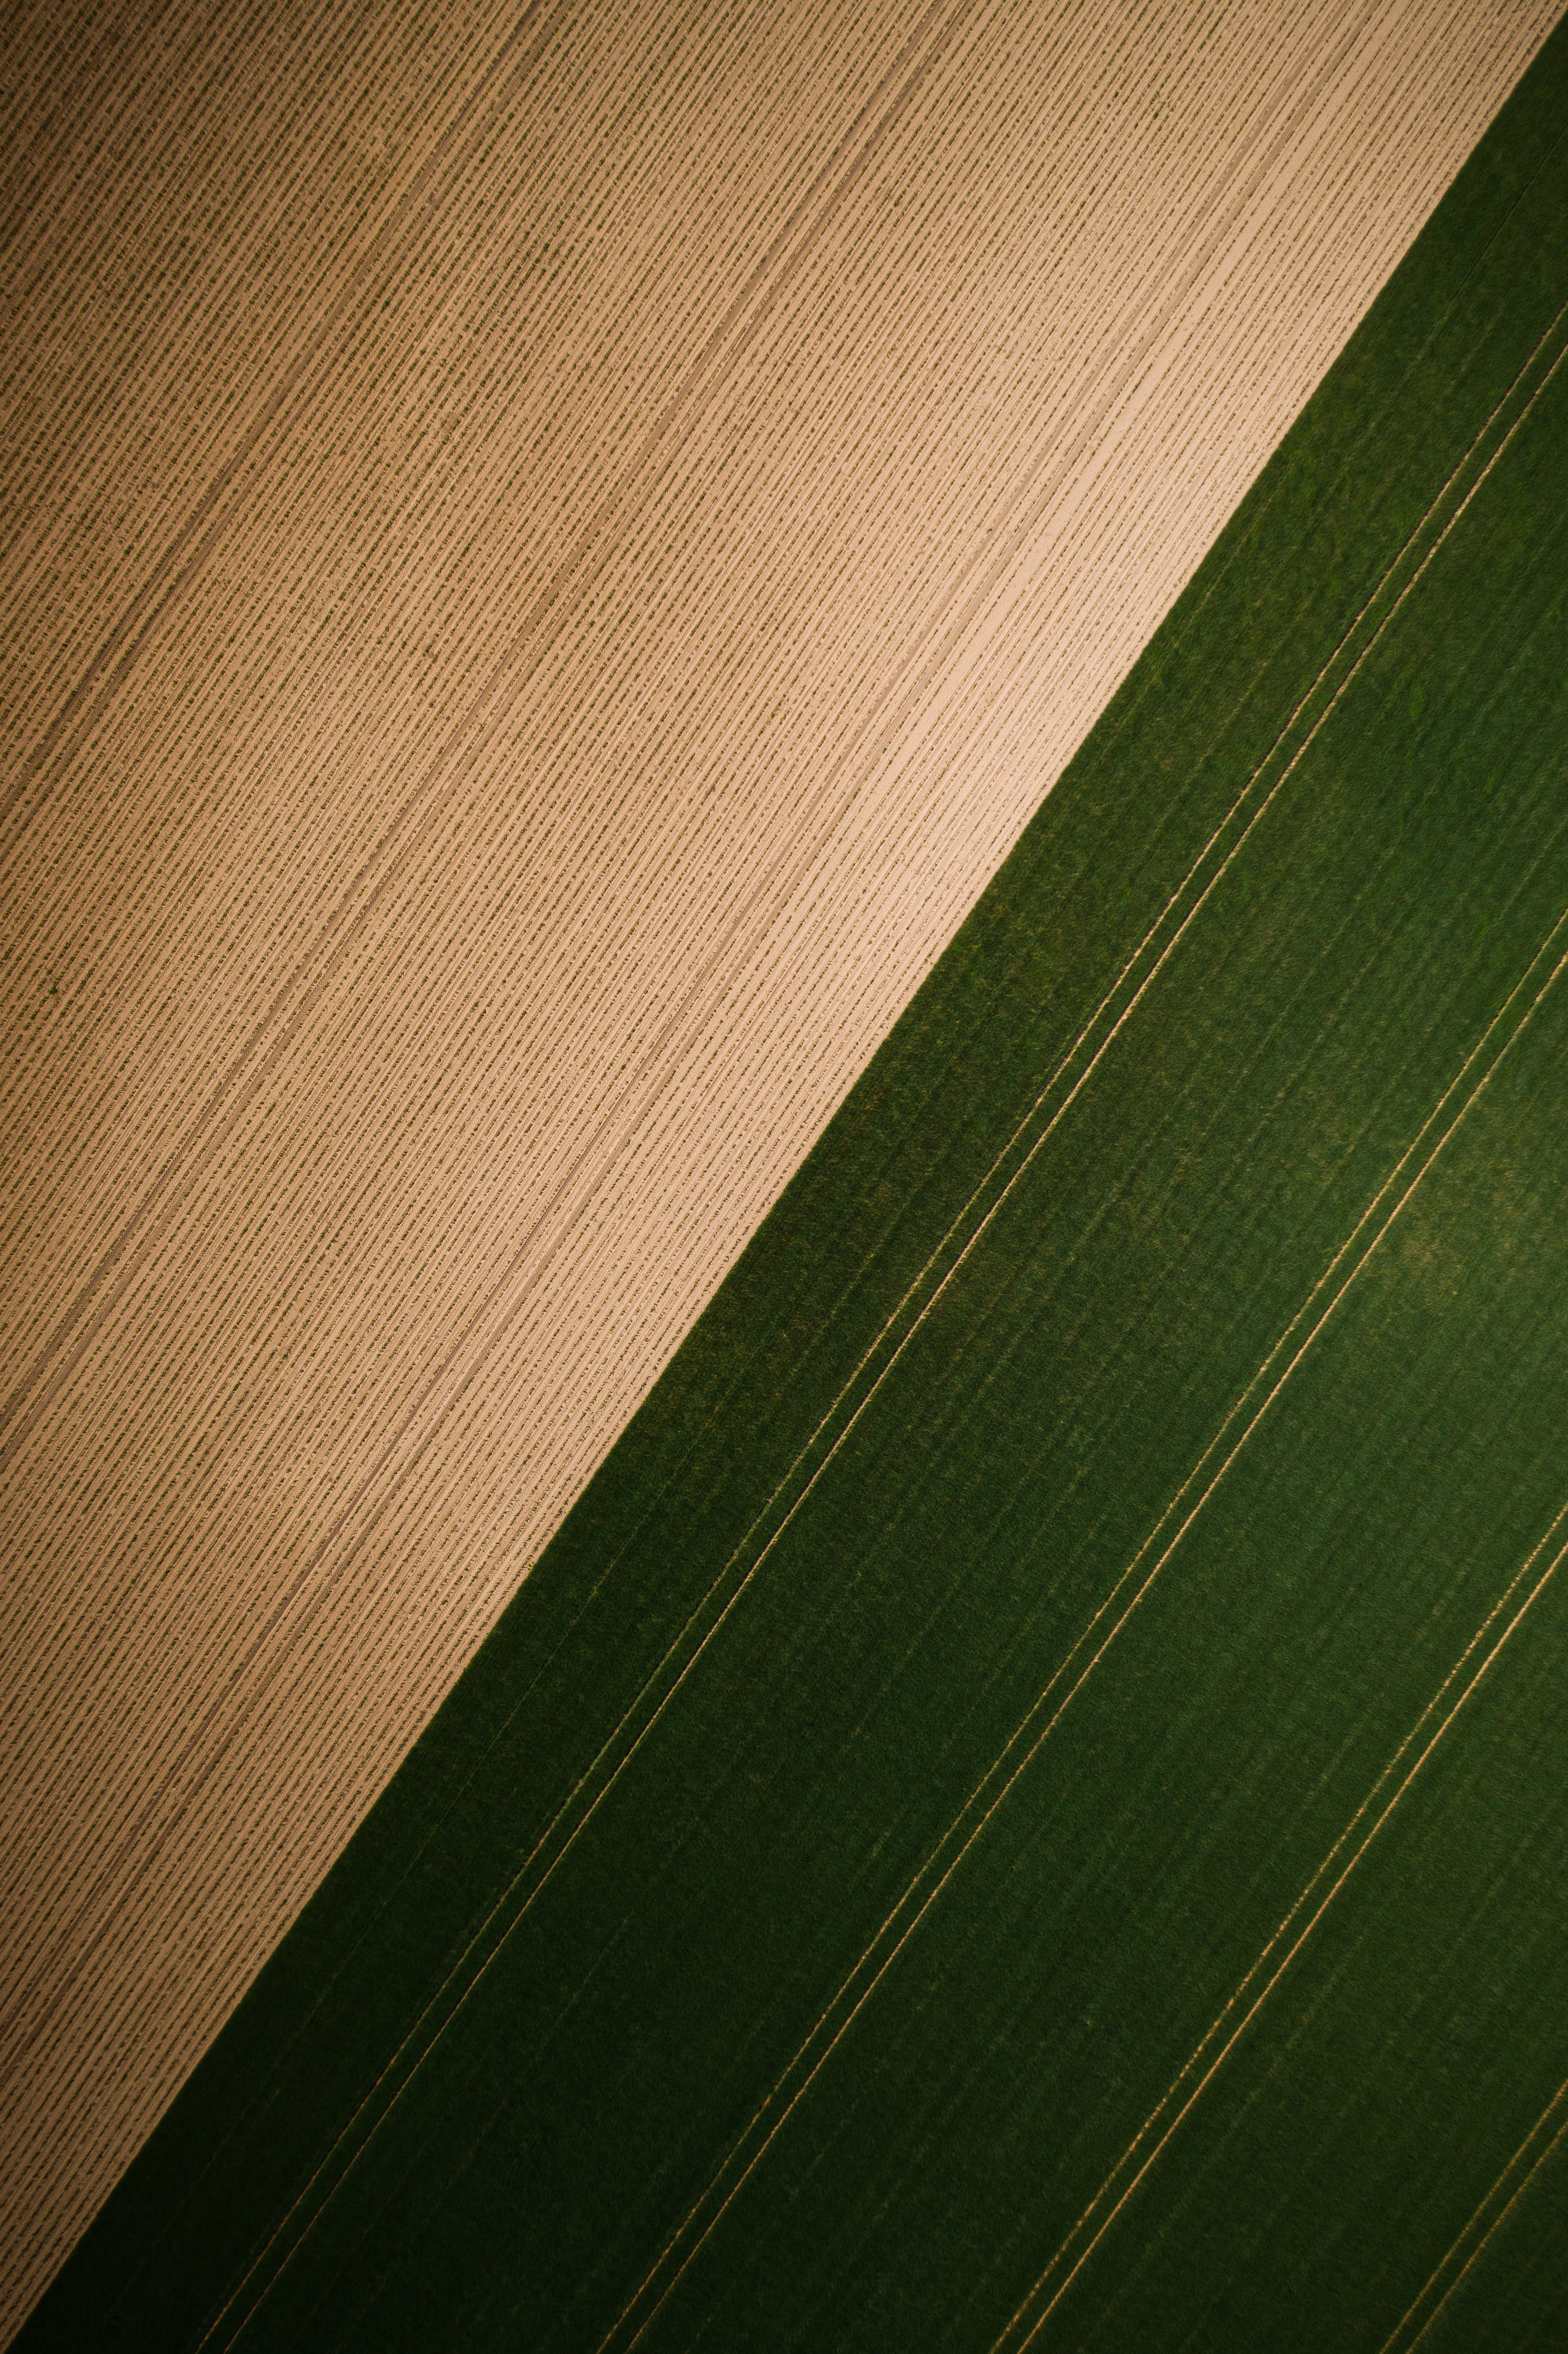 streaks, stripes, textures, grass, view from above, texture, field Full HD